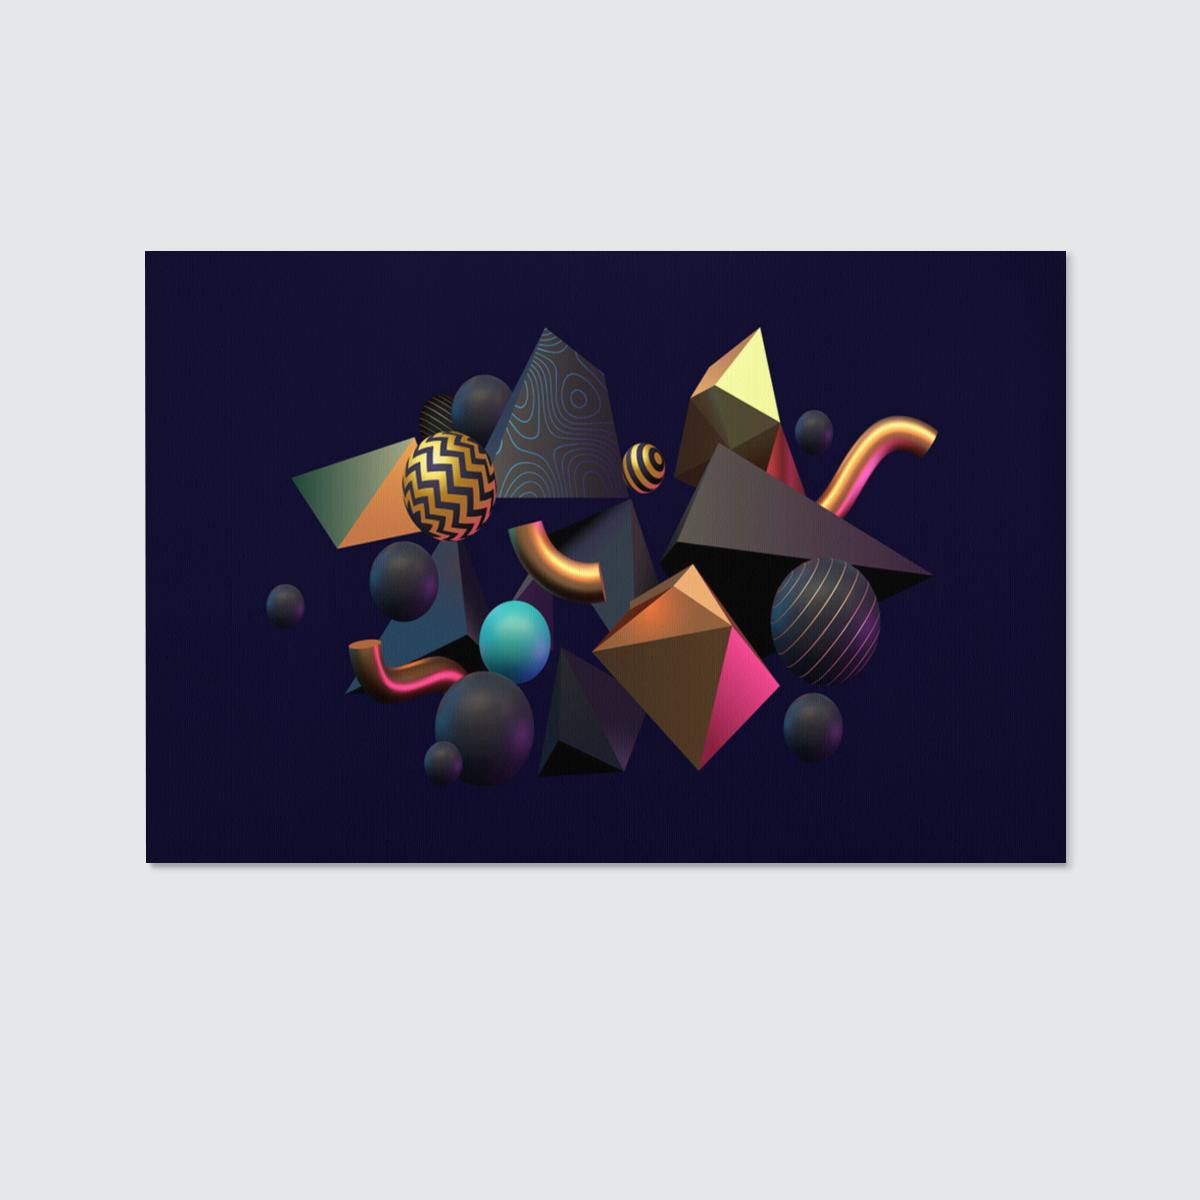 3D Abstract Black, Gold And Teal Geometric Shapes Canvas